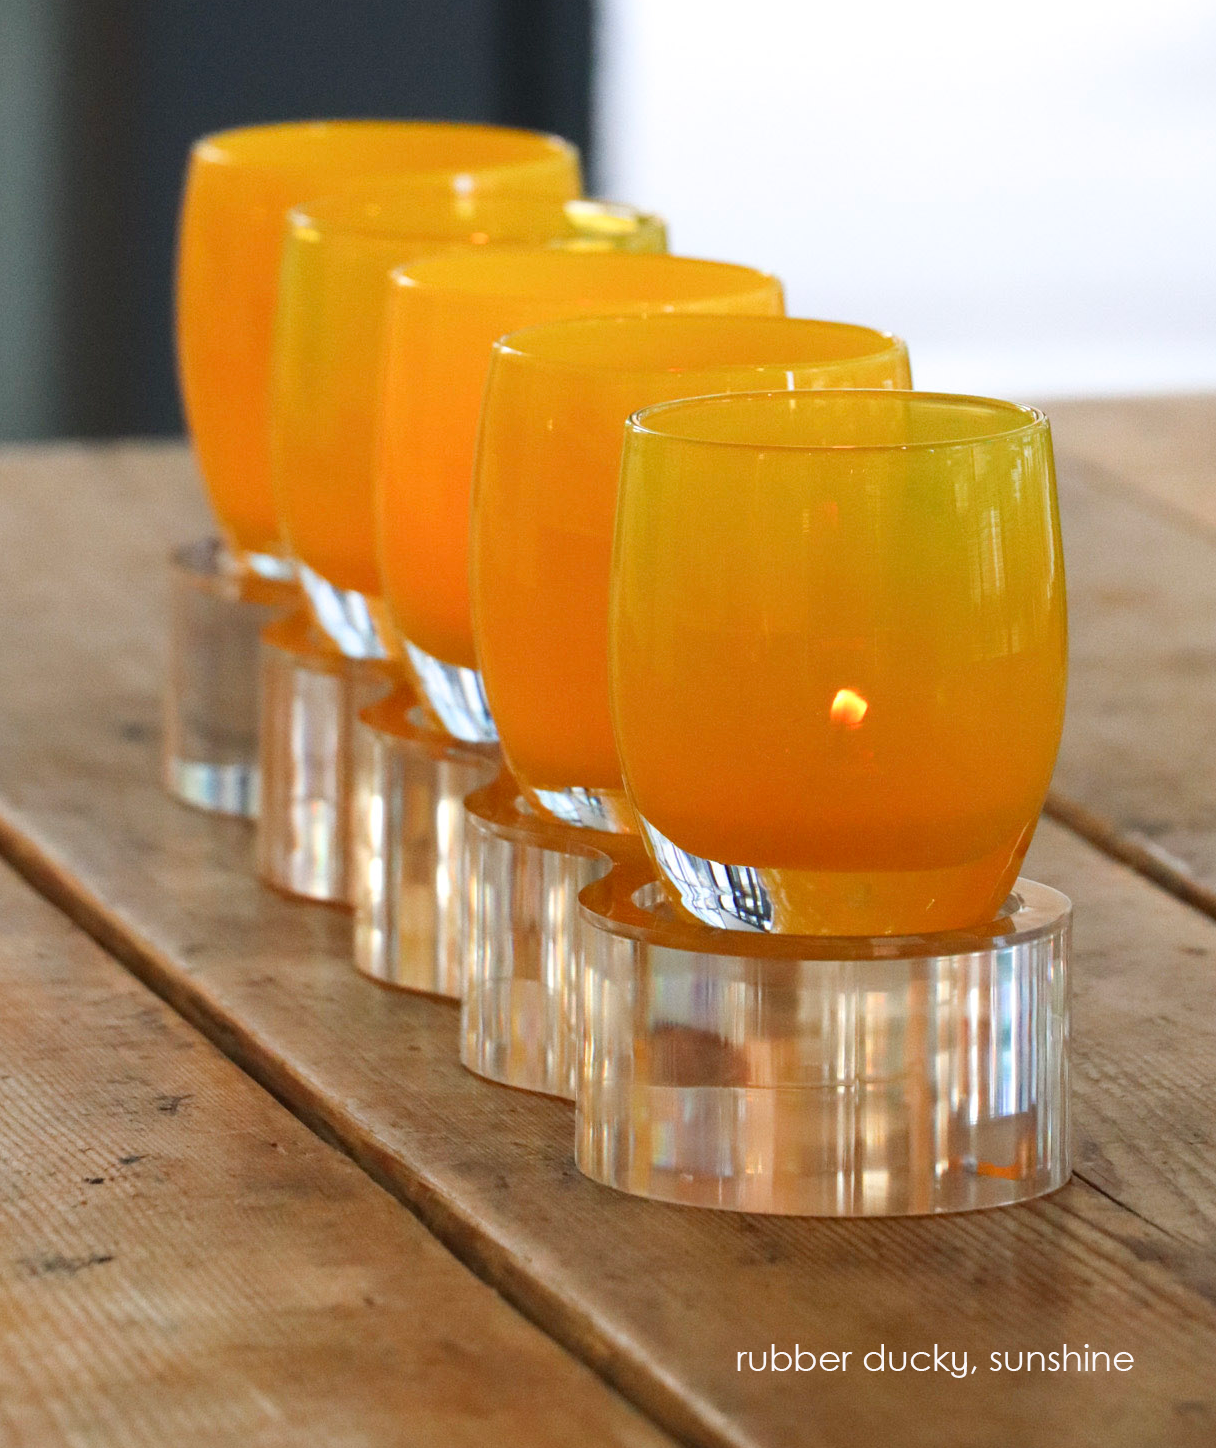 rubber ducky yellow translucent, sunshine opaque yellow, hand-blown glass votive candle holders